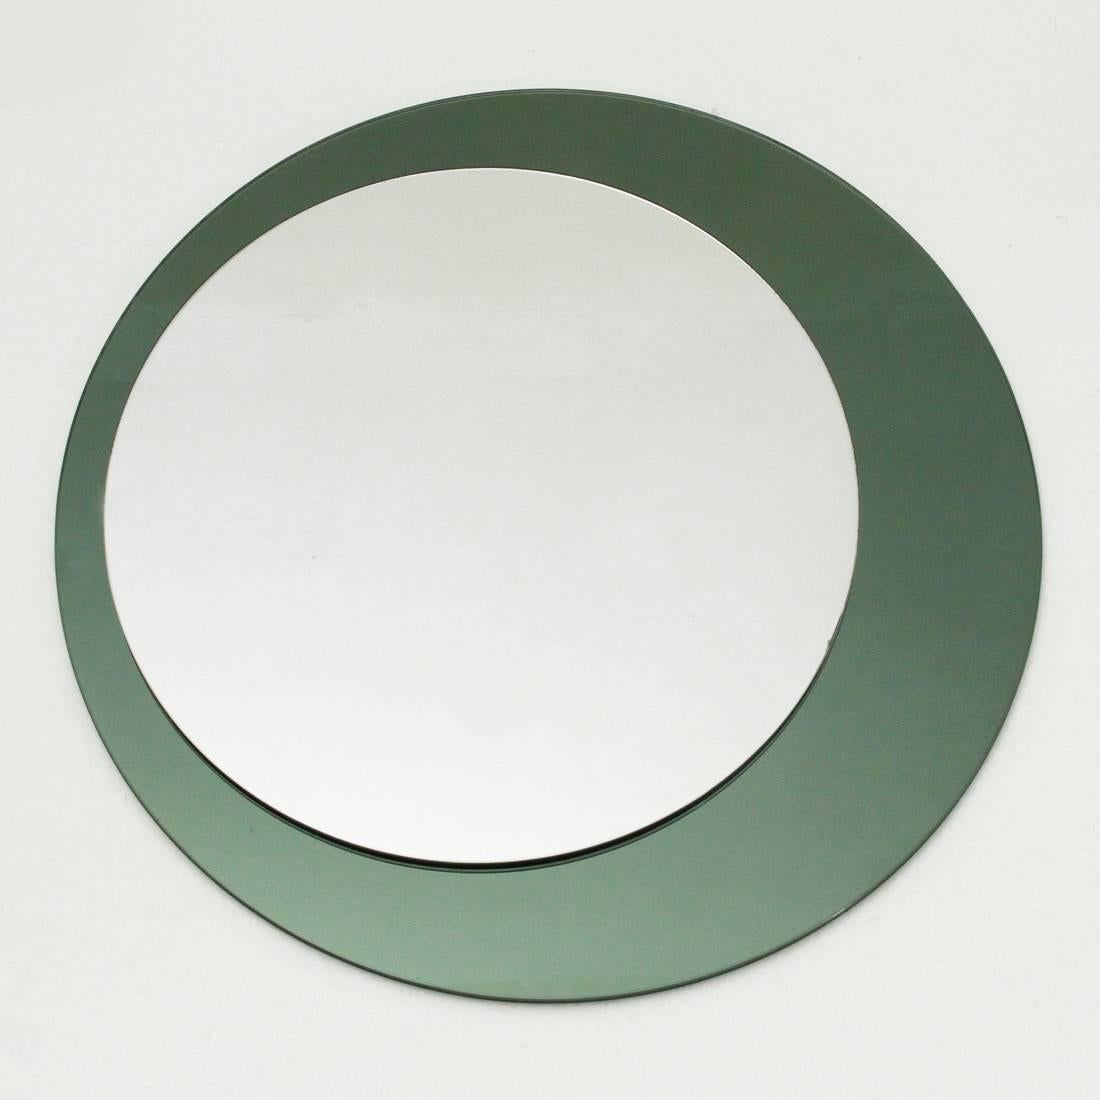 Italian mirror, 1970s production.
Mirror frame in smoked glass.
Circular mirror.
Possibility of being hung in various directions.
Good general conditions, some signs due to normal use over time.

Dimensions: Circumference 68 cm, depth 1.5